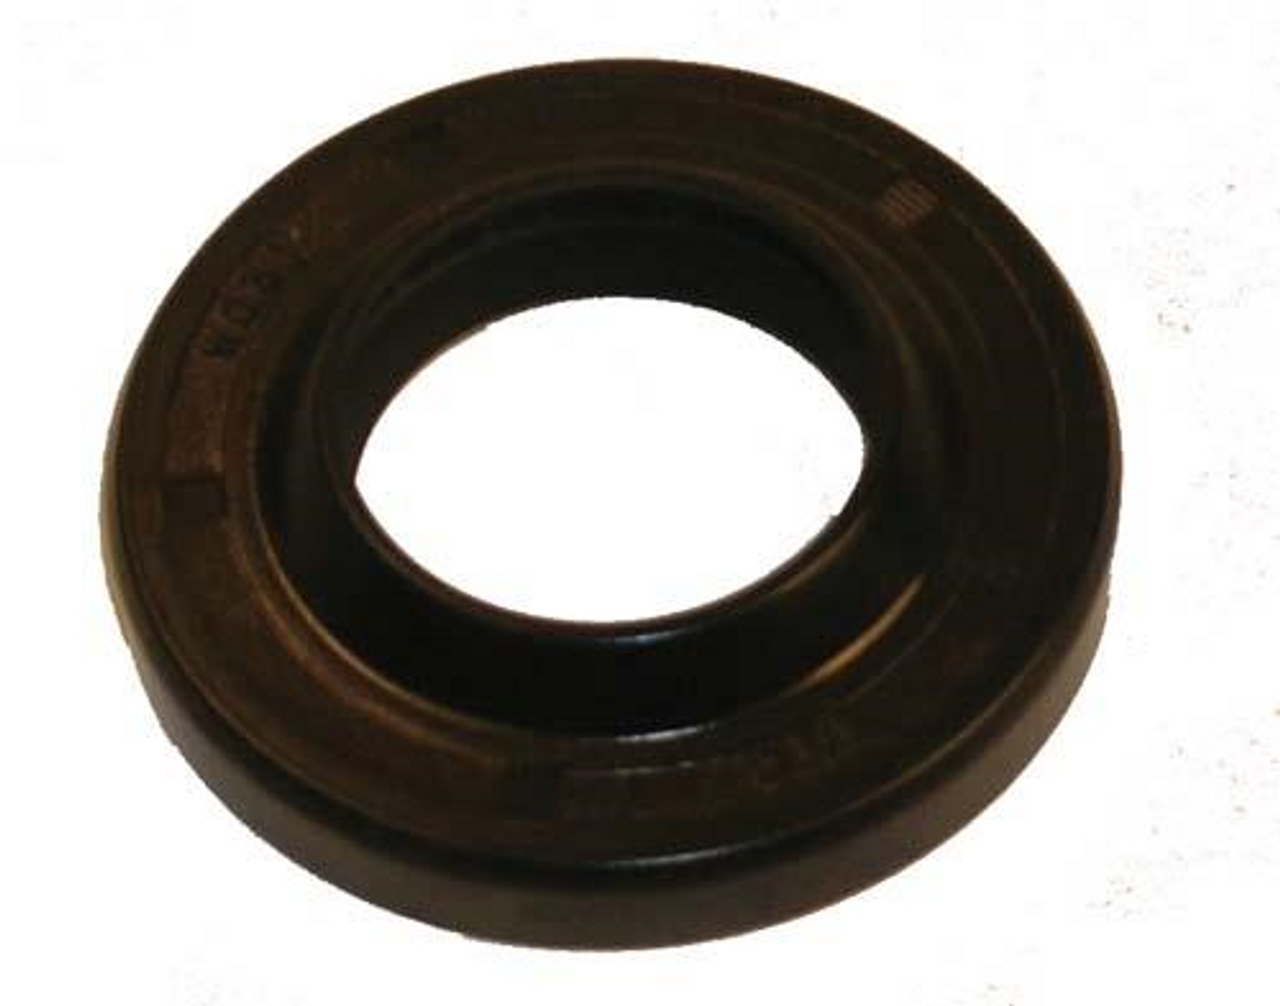 E-Z-GO TXT Steering Box Pinion Seal (Years 2001-Up), 50495